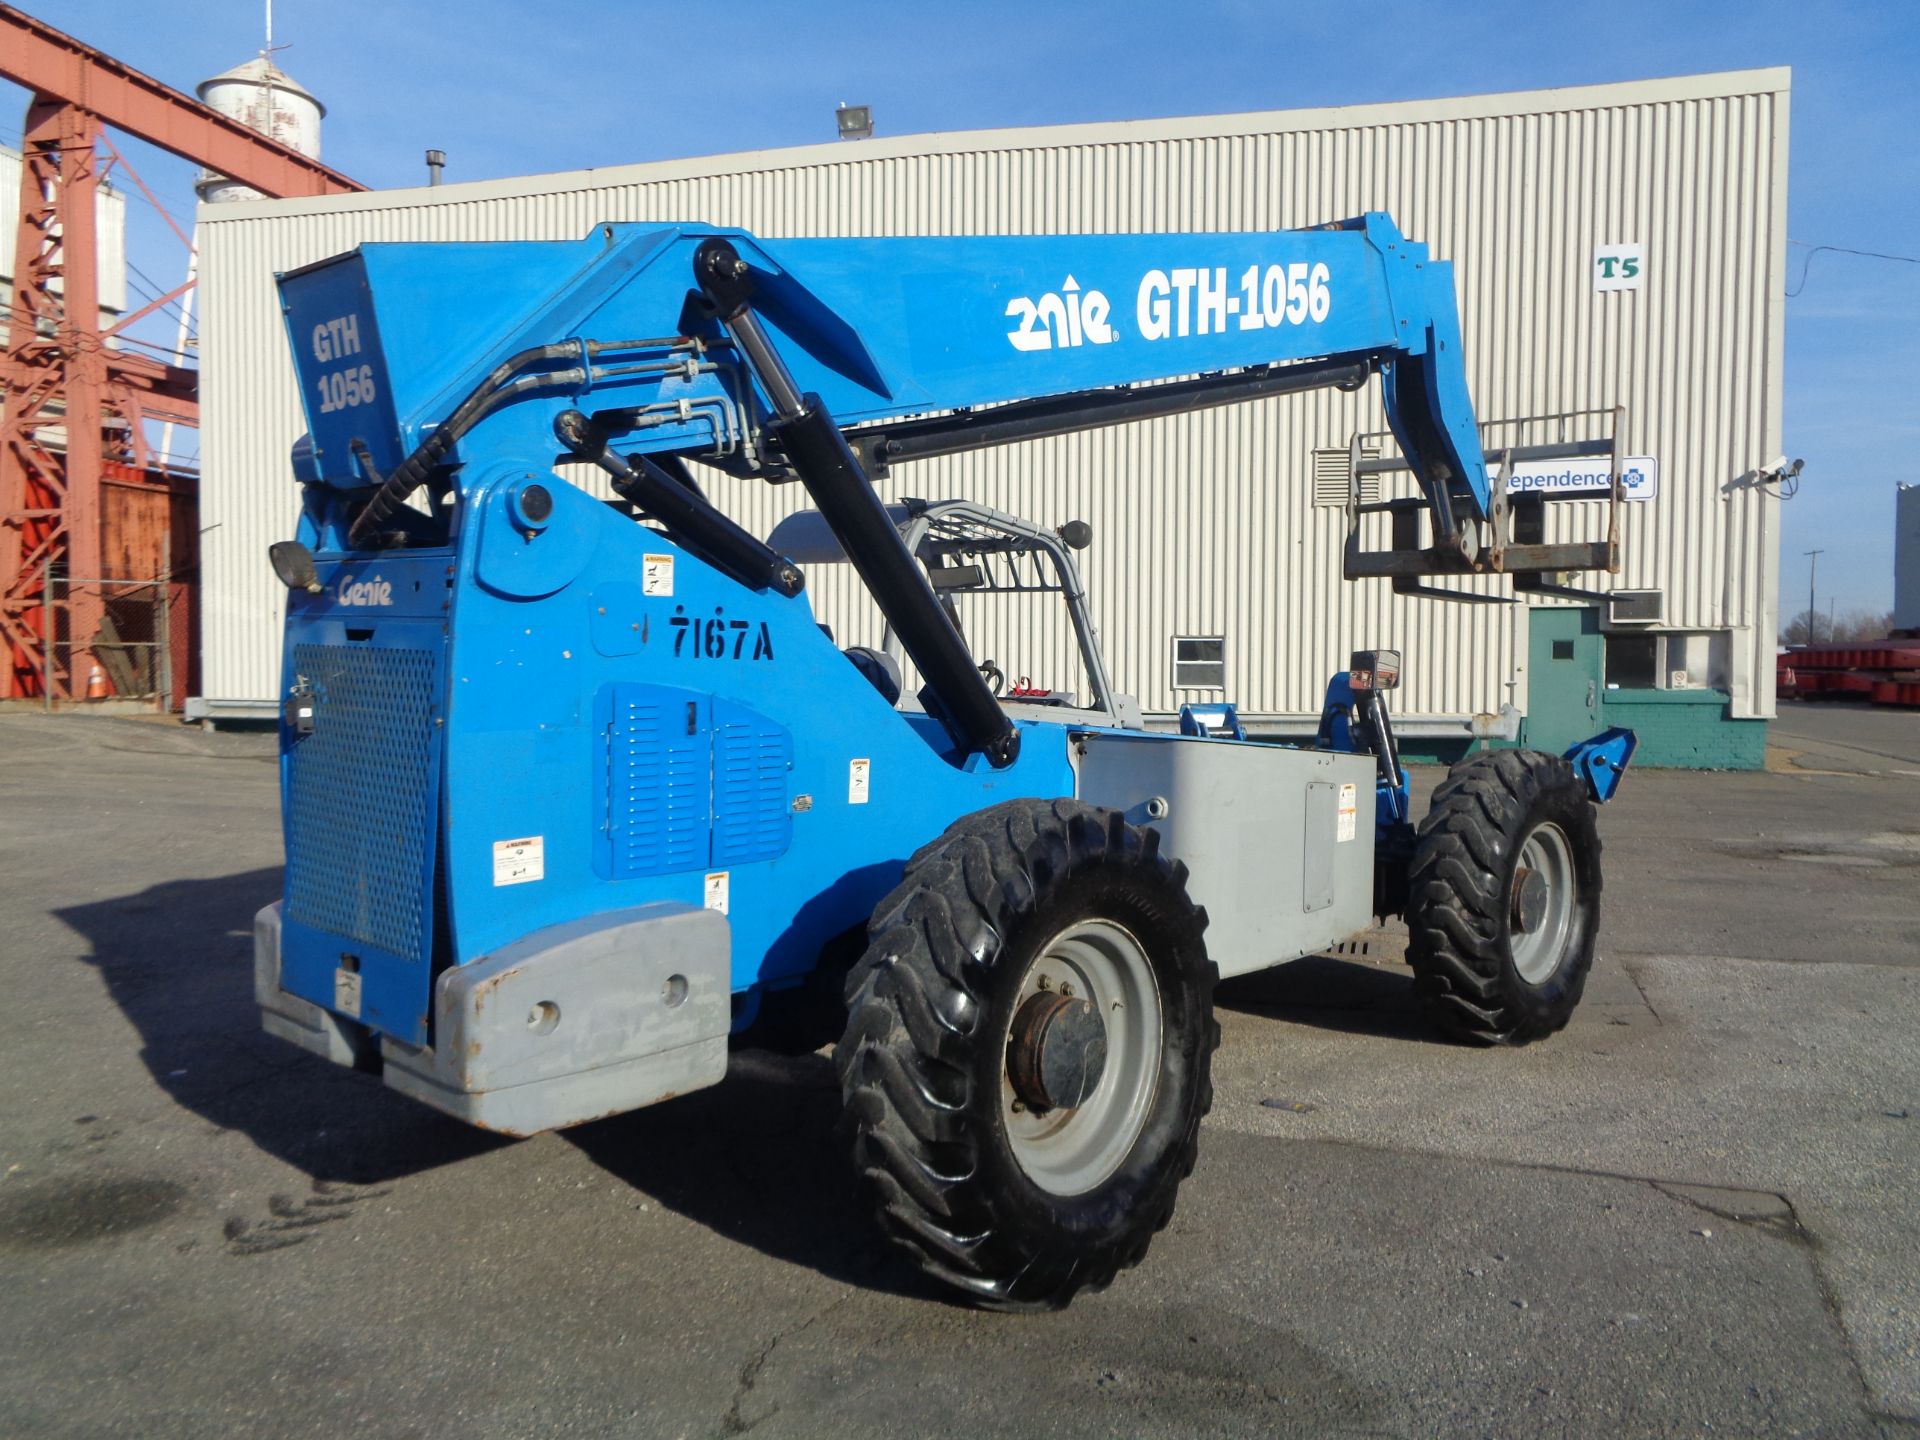 2013 Genie GTH1056 10,000 lb Telescopic Forklift - Image 3 of 17